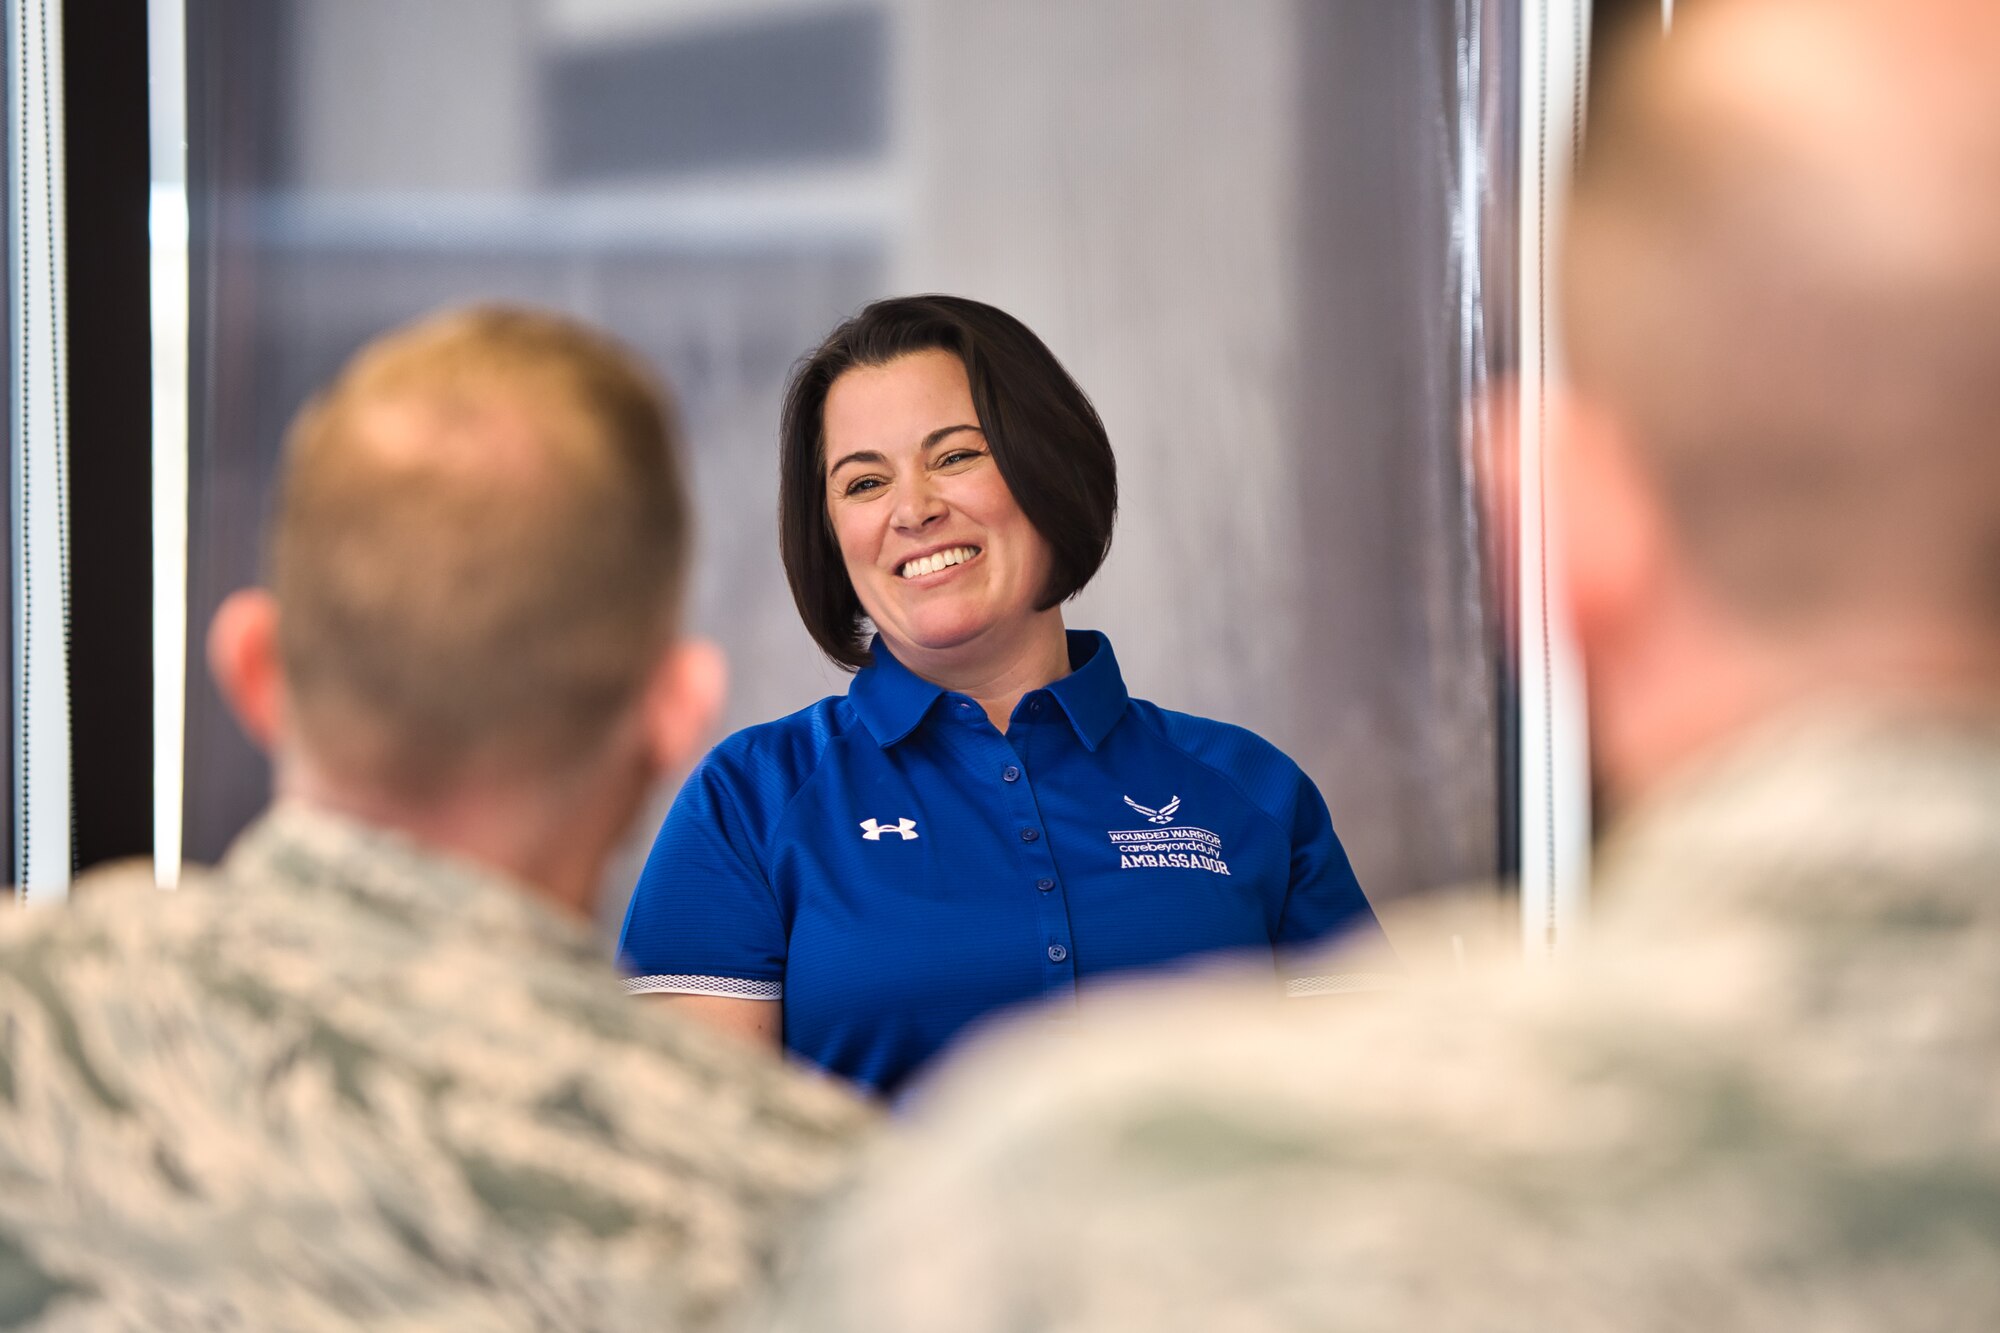 Colonel Nicole Malachowski, USAF (Ret.), former commander of 333rd Fighter Squadron, first female pilot selected to fly as part of Air Force Air Demonstration Squadron “Thunderbirds,” and ambassador for Wounded Warrior Project, shares her story with base personnel during visit to Schriever Air Force Base, Colorado, December 19, 2019 (U.S. Air Force/Katie Calvert)